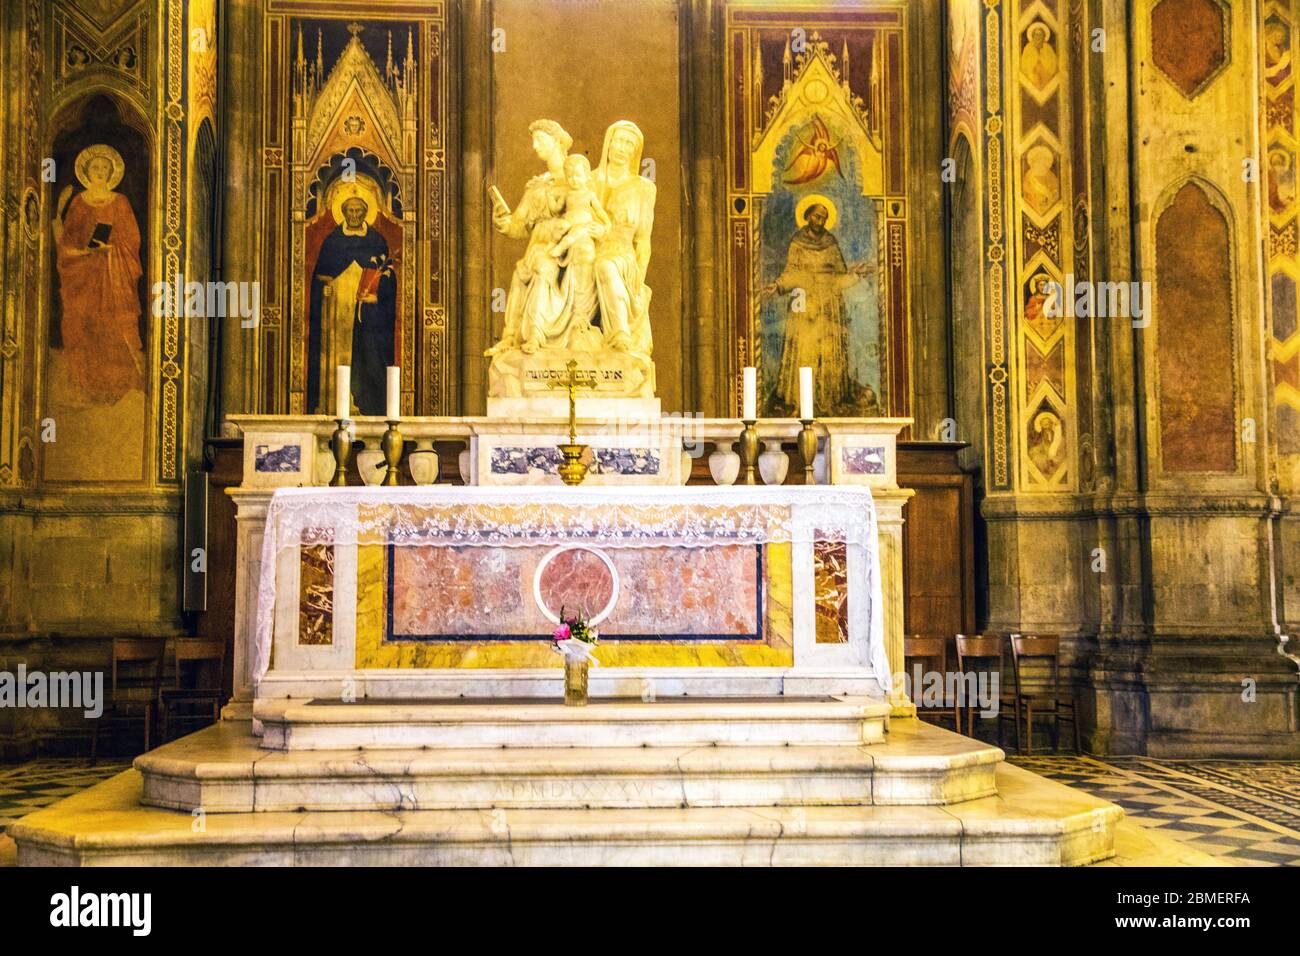 The St. Anne Altar located in the Orsanmichele church and museum in Florence Italy Stock Photo